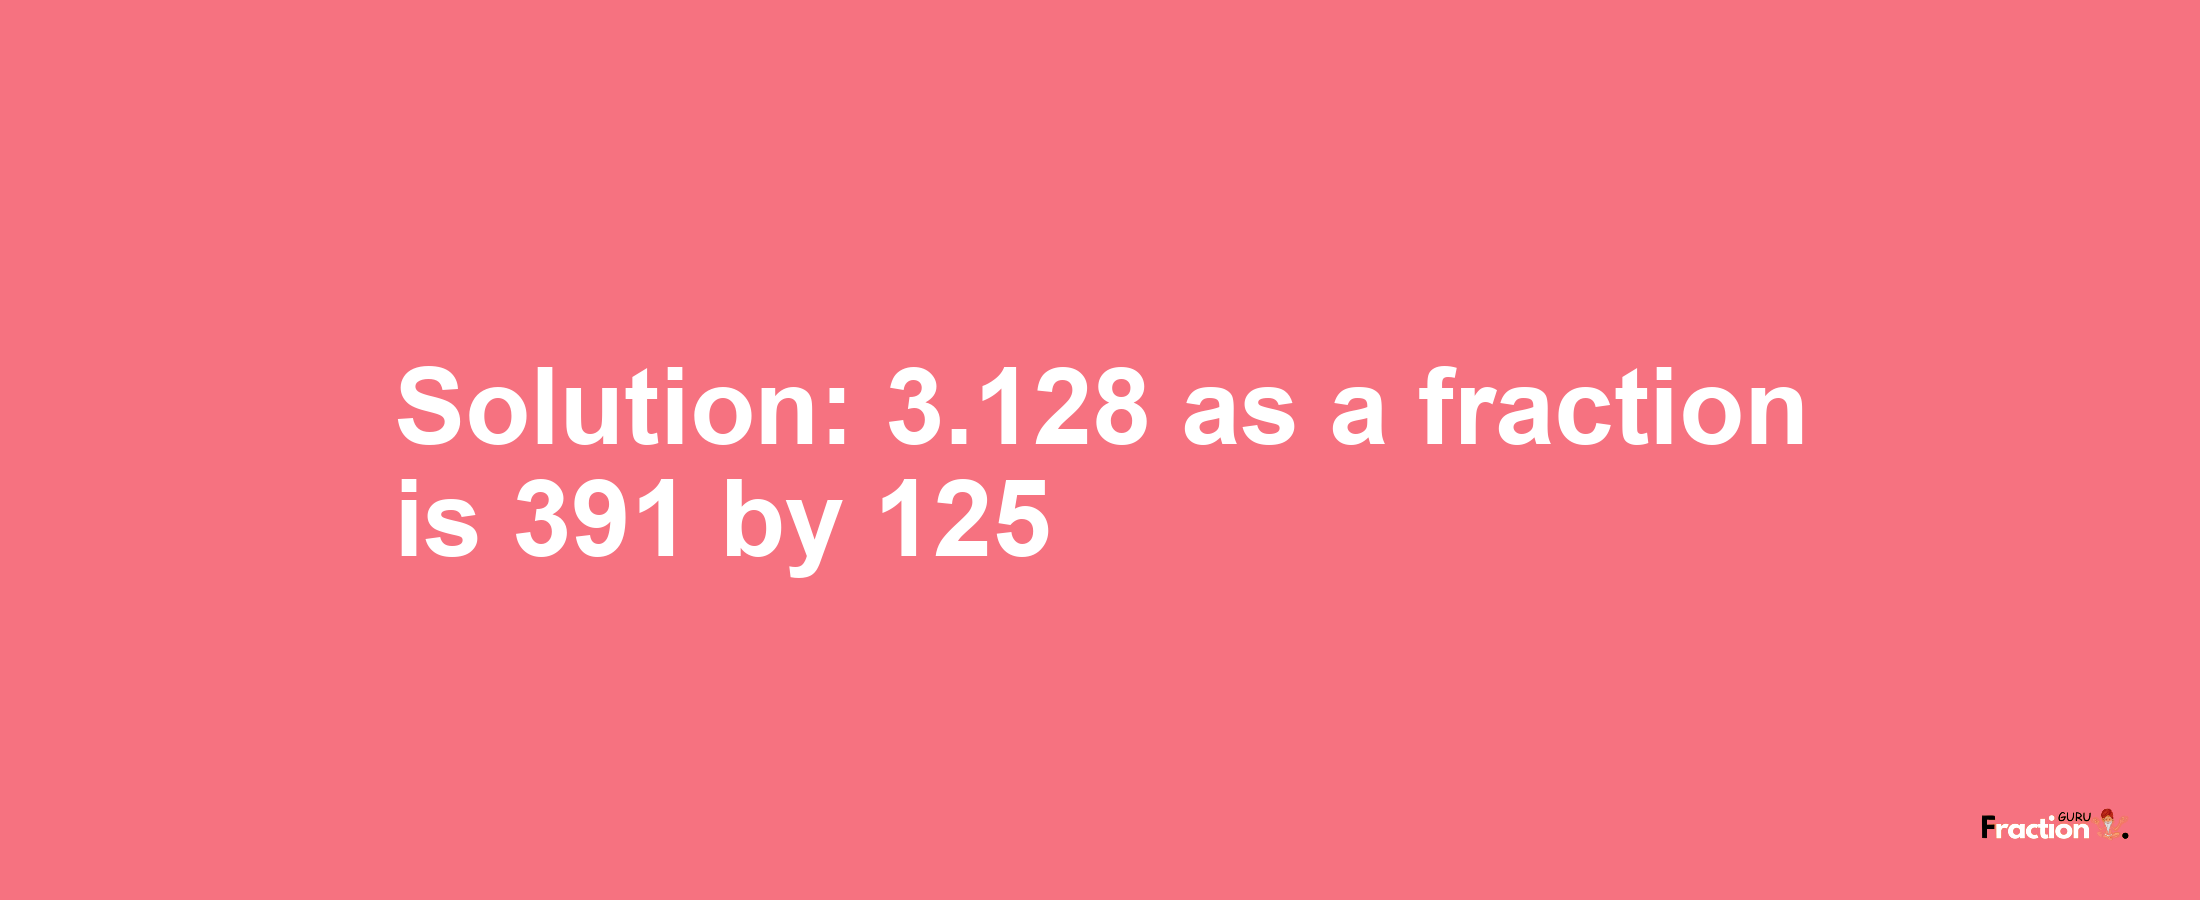 Solution:3.128 as a fraction is 391/125